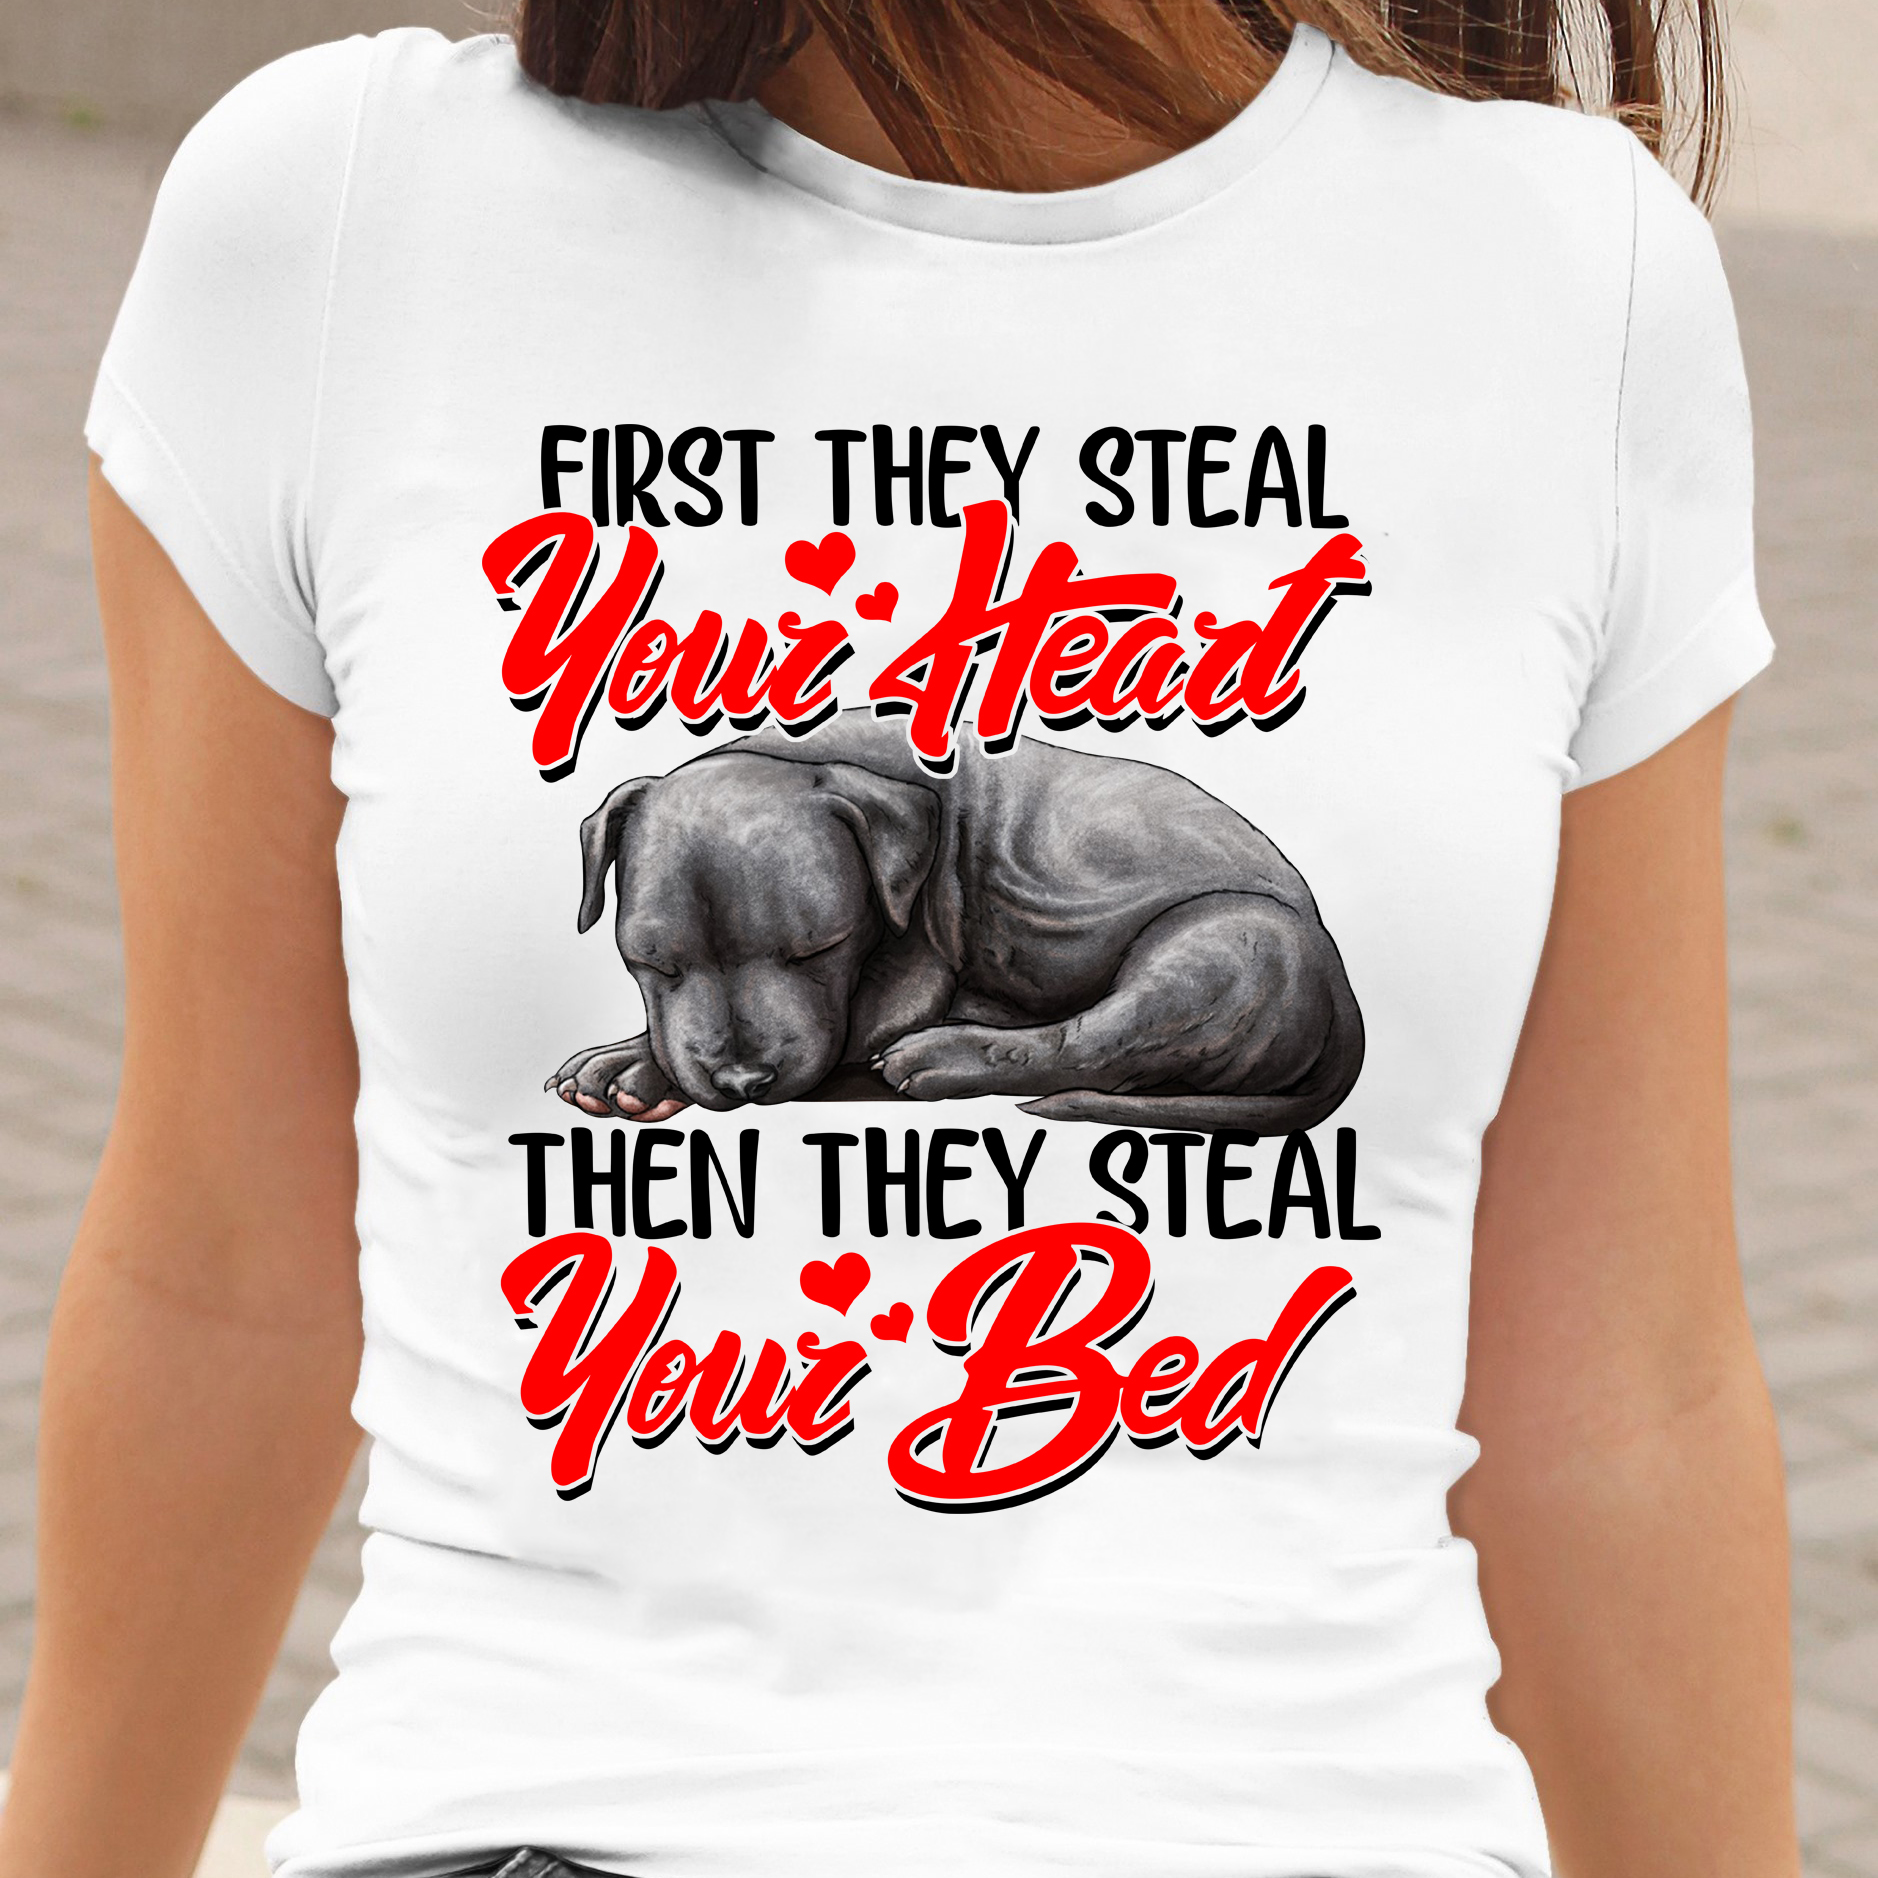 First they steal your heart then they steal your bed- Black dog